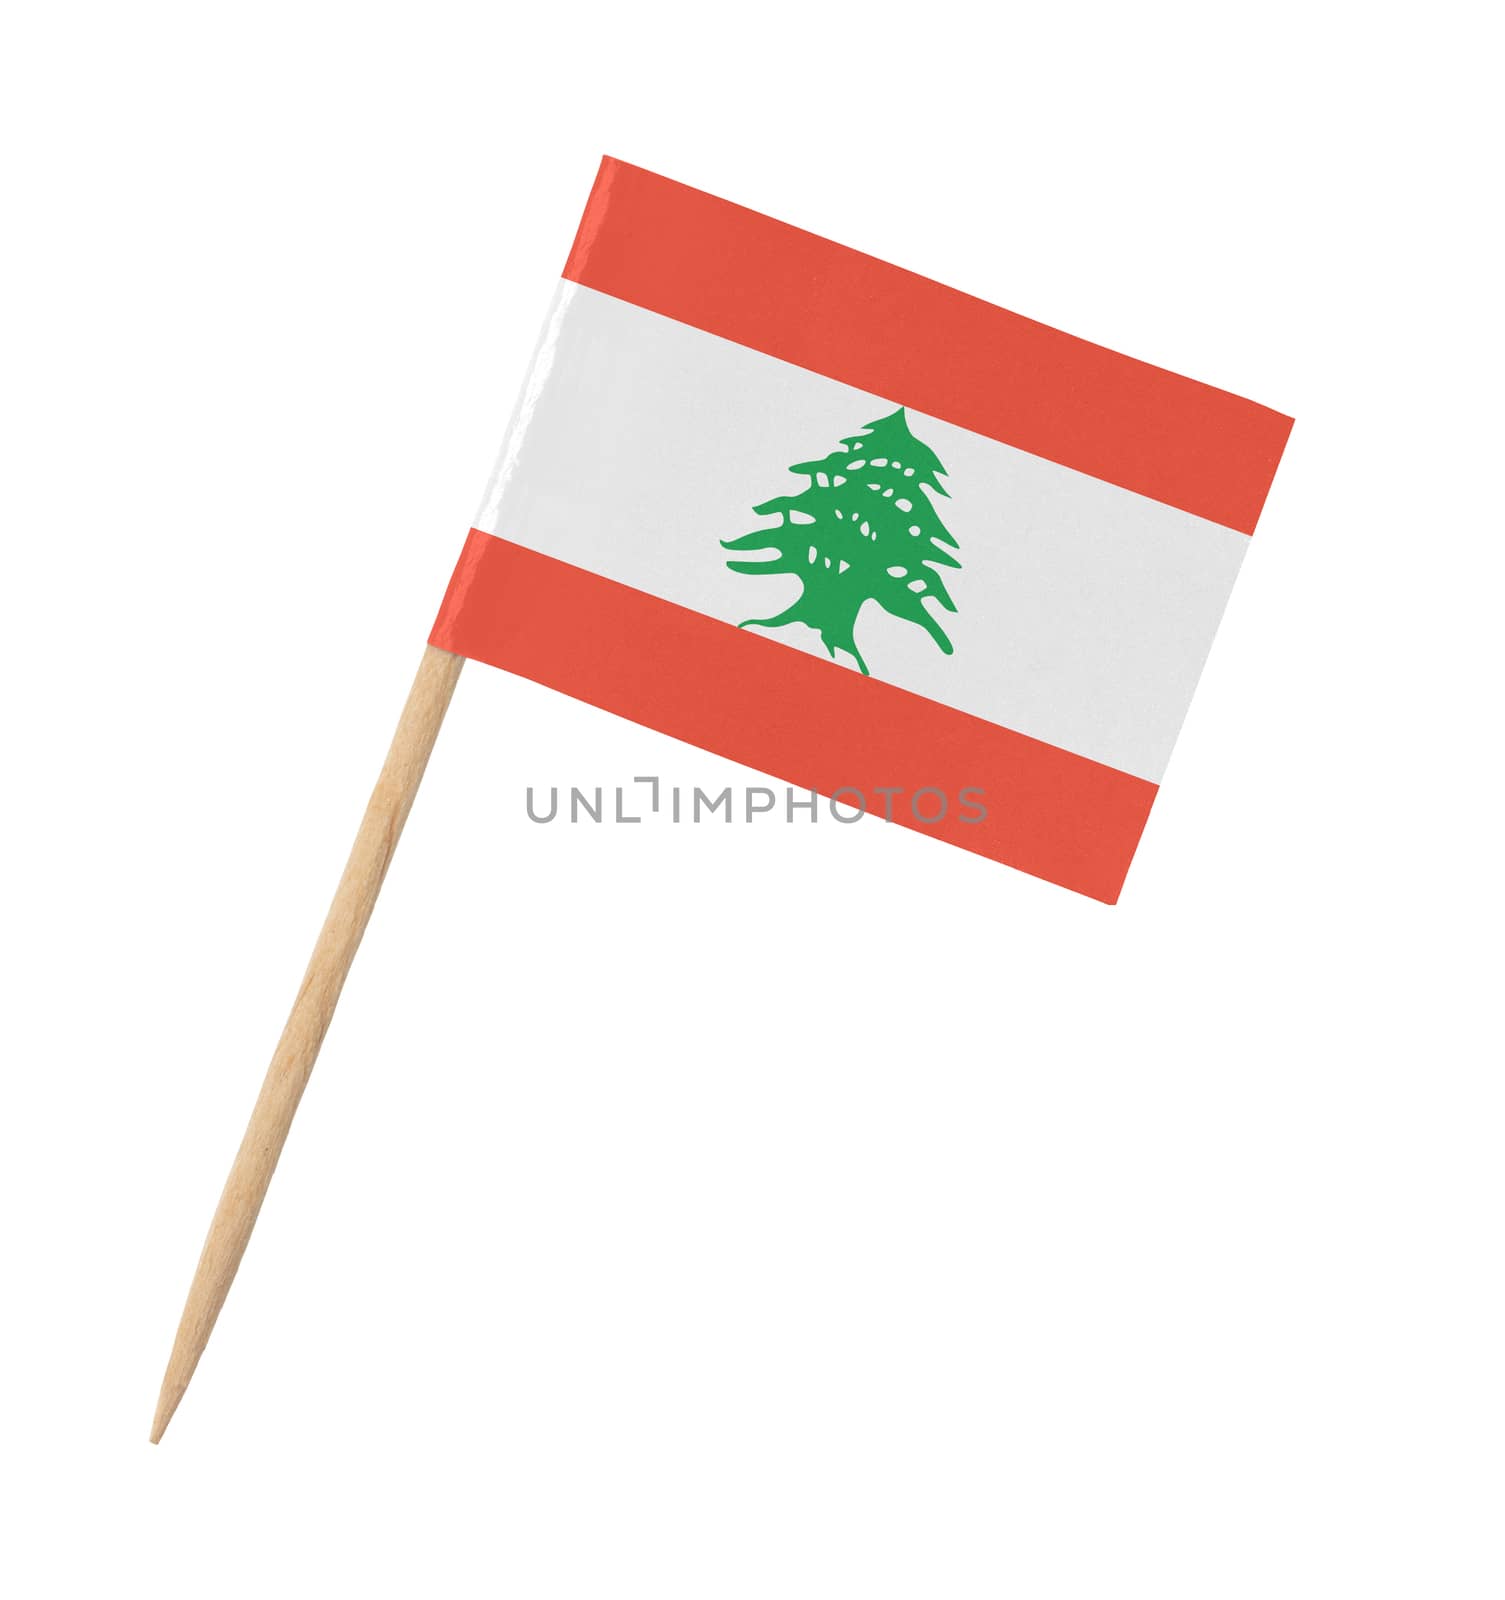 Small paper flag of Lebanon on wooden stick by michaklootwijk